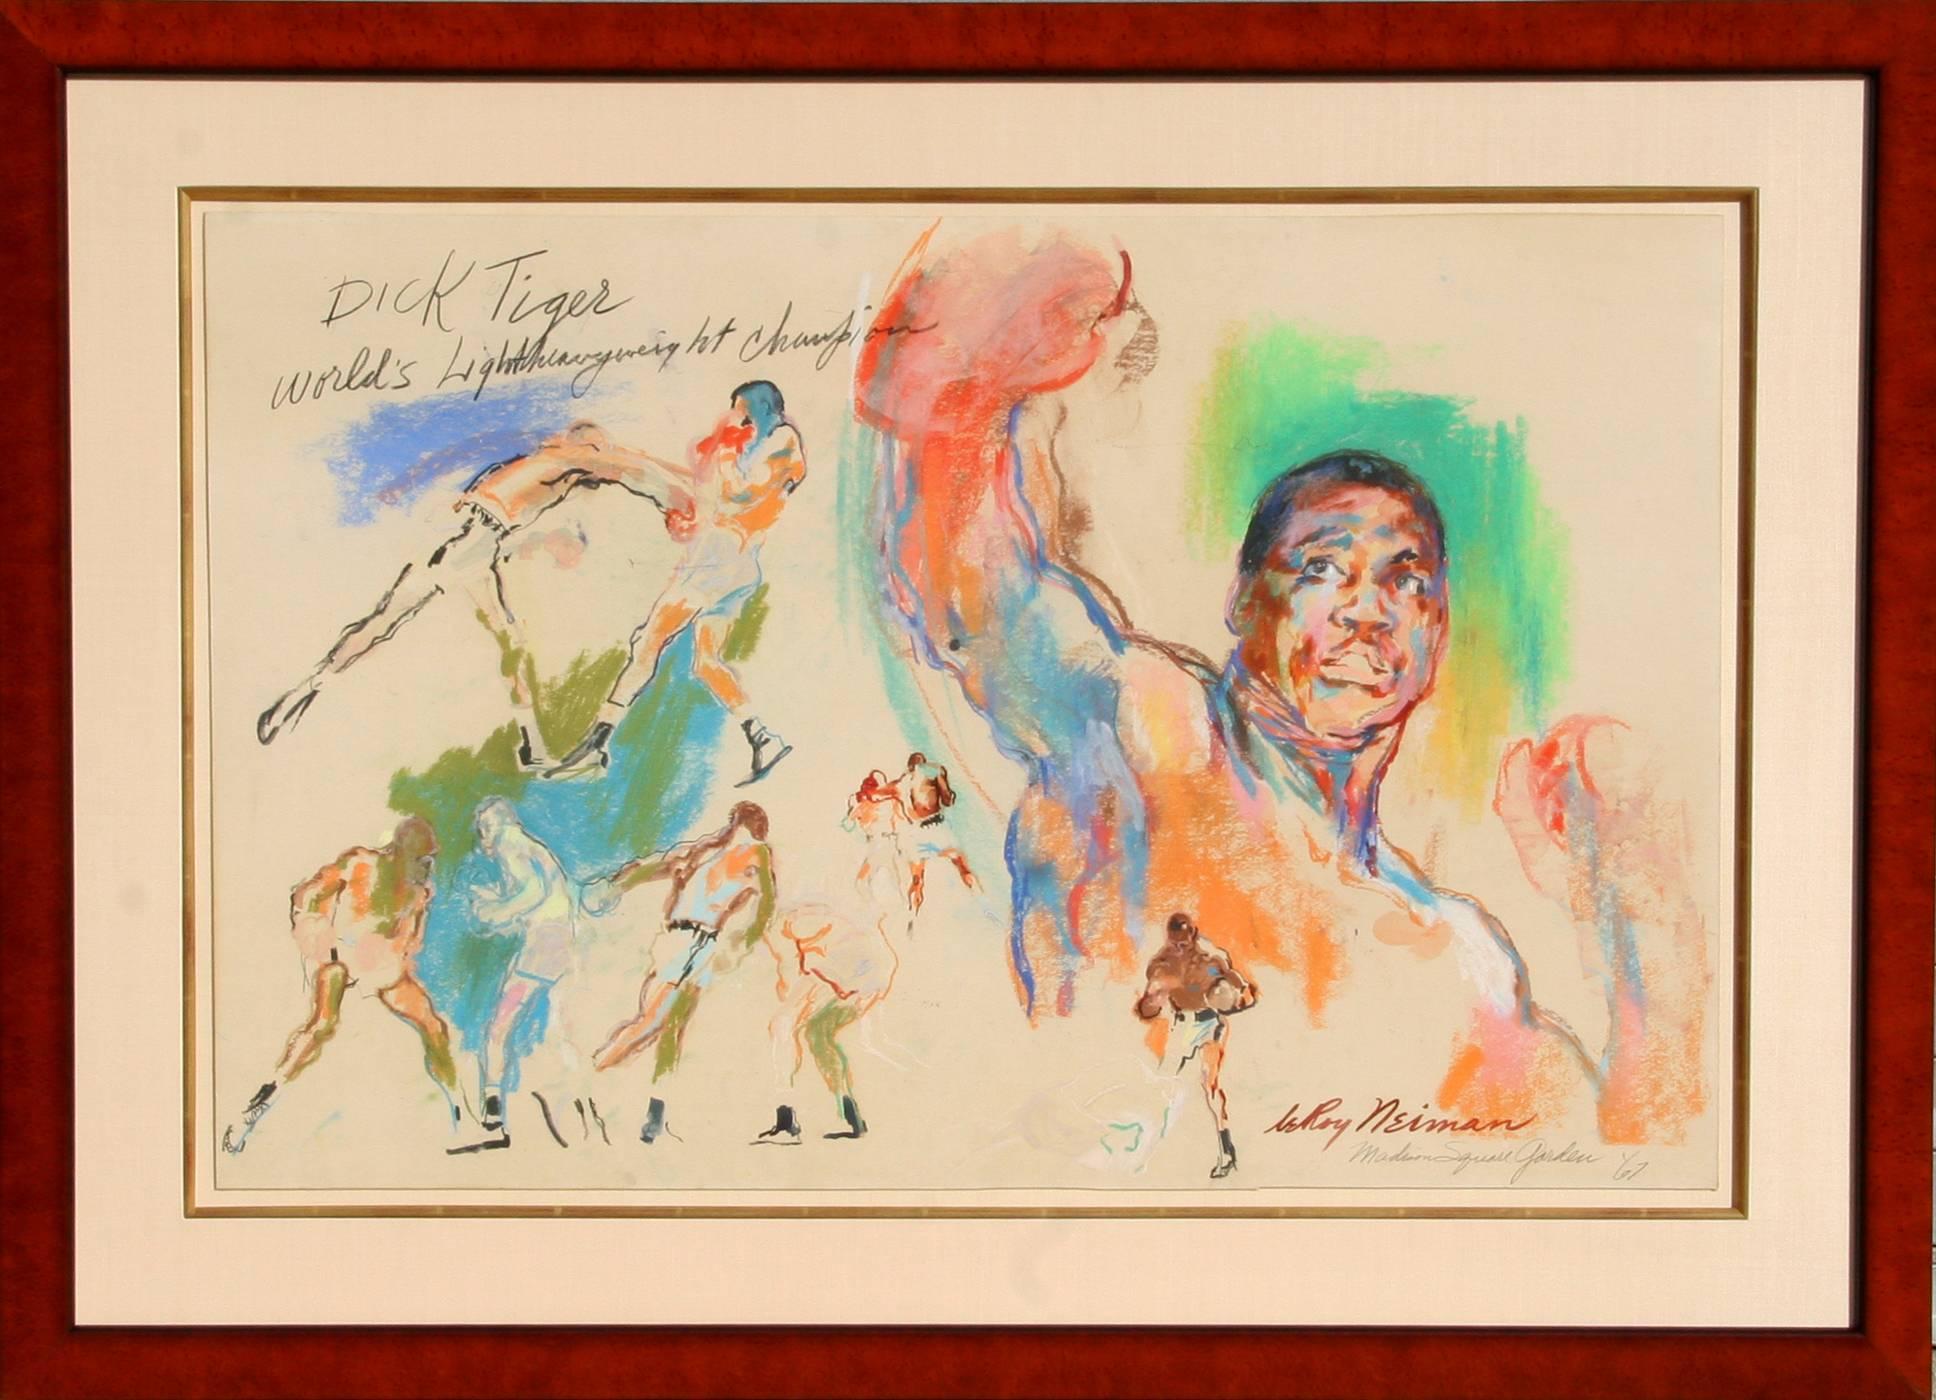 Dick Tiger, Boxing Painting by Leroy Neiman 1967